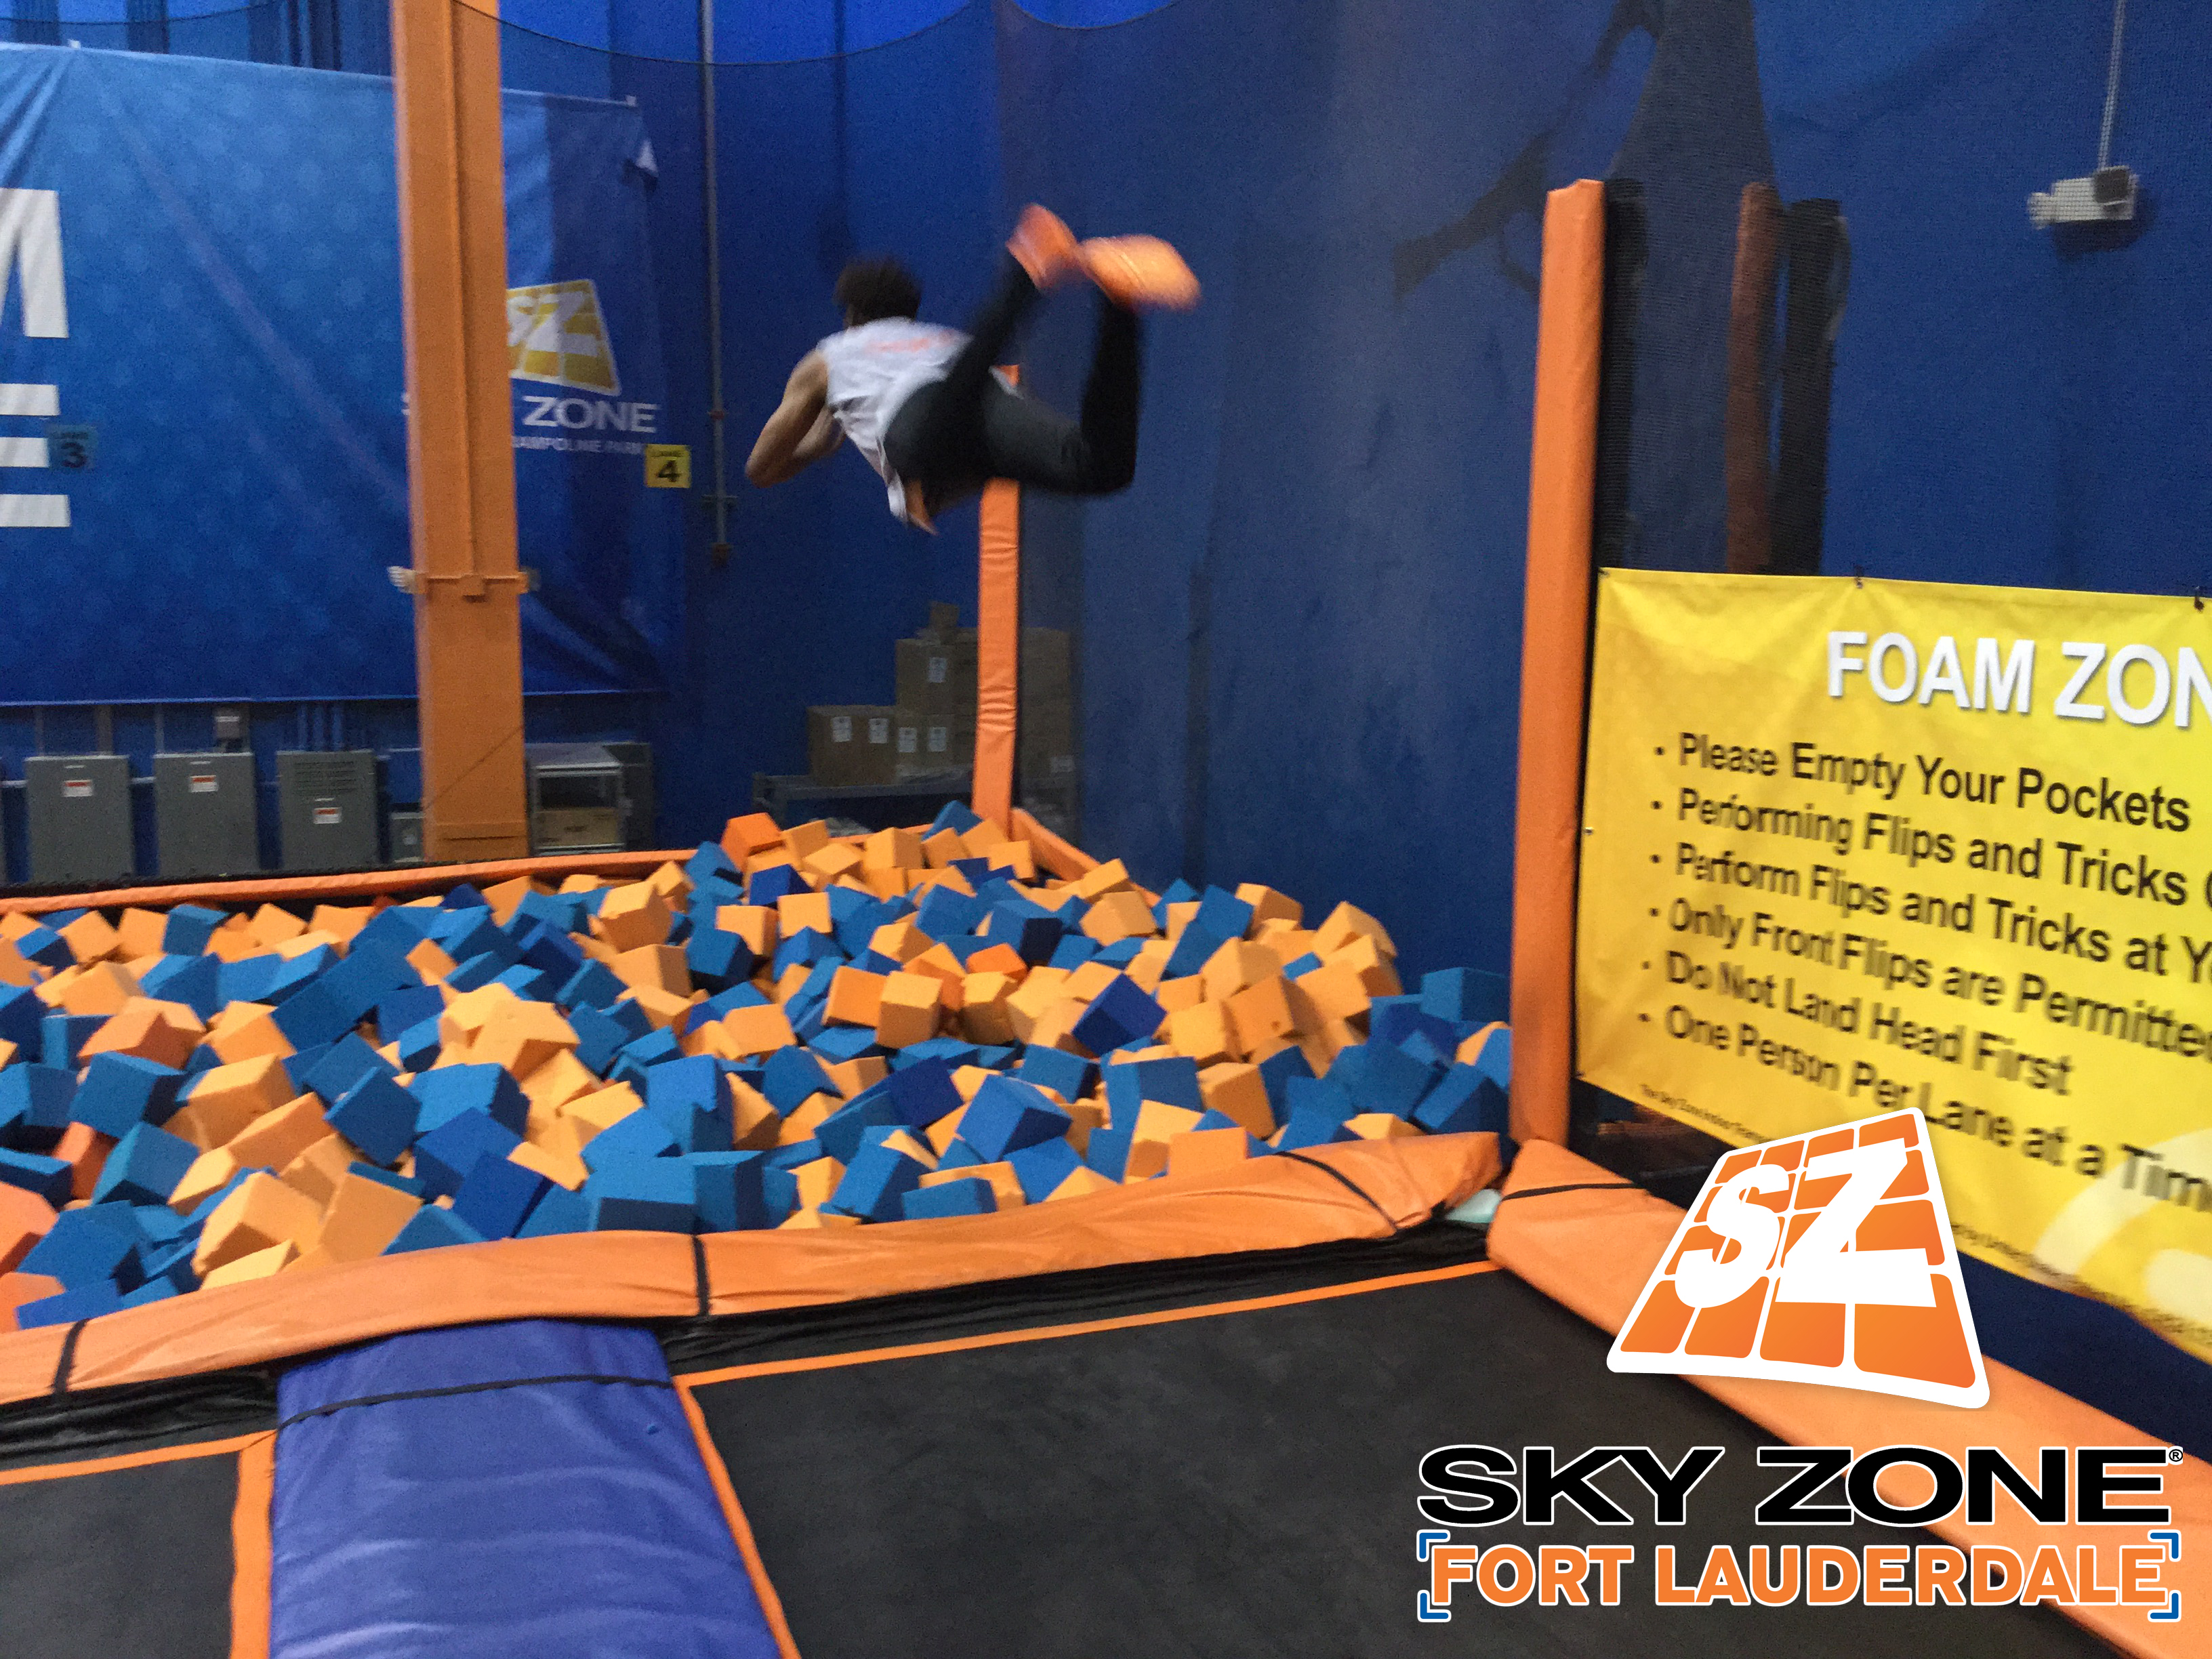 Sky Zone Fort Lauderdale Coupons near me in Pompano Beach | 8coupons